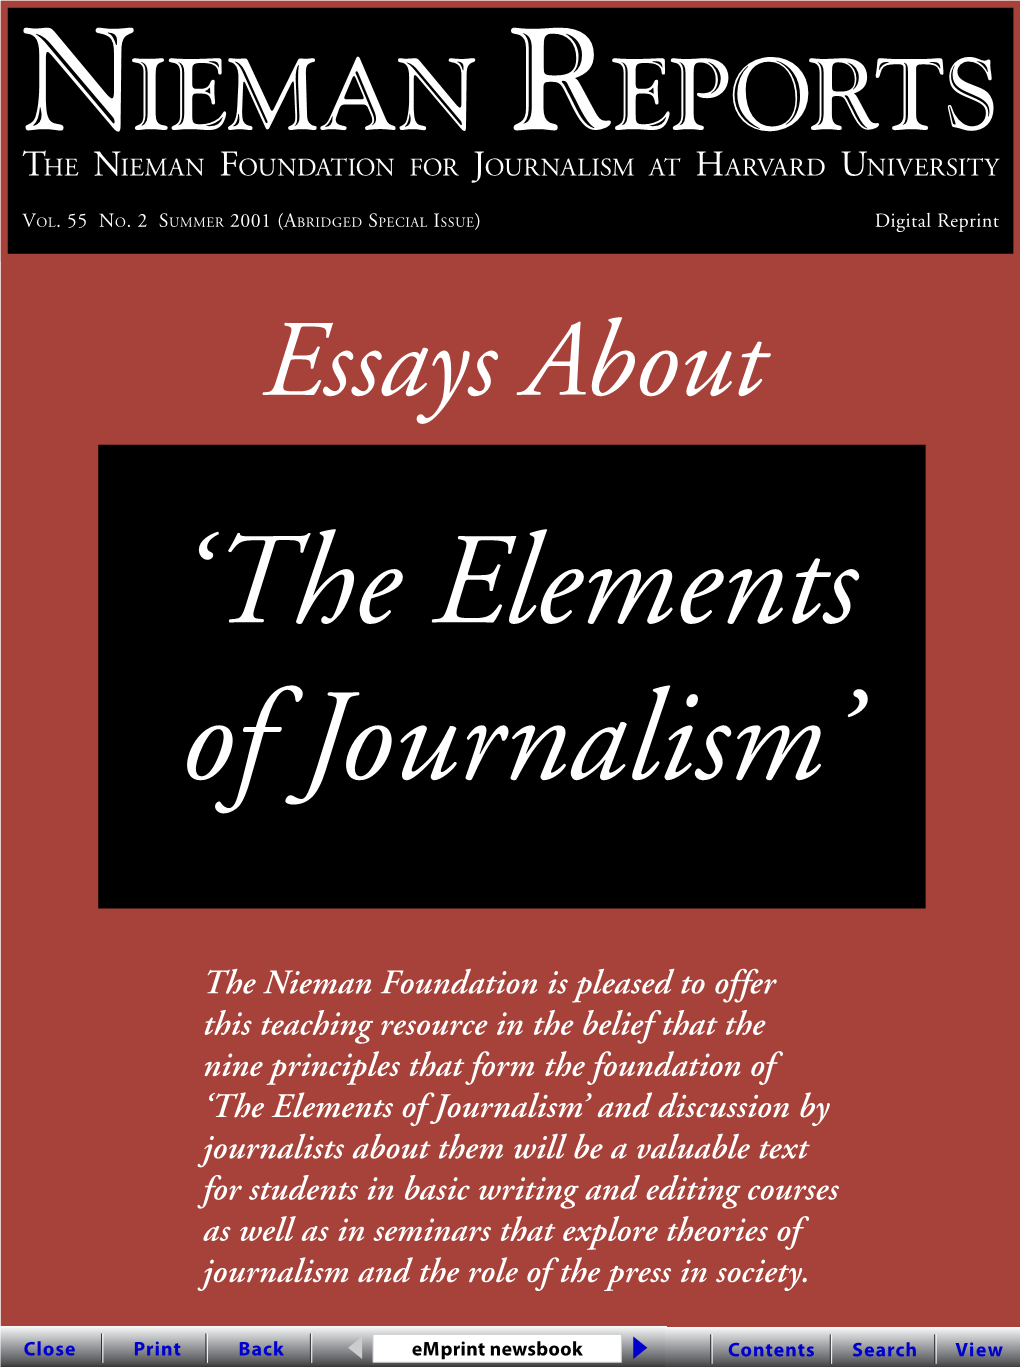 Essays About 'The Elements of Journalism,'